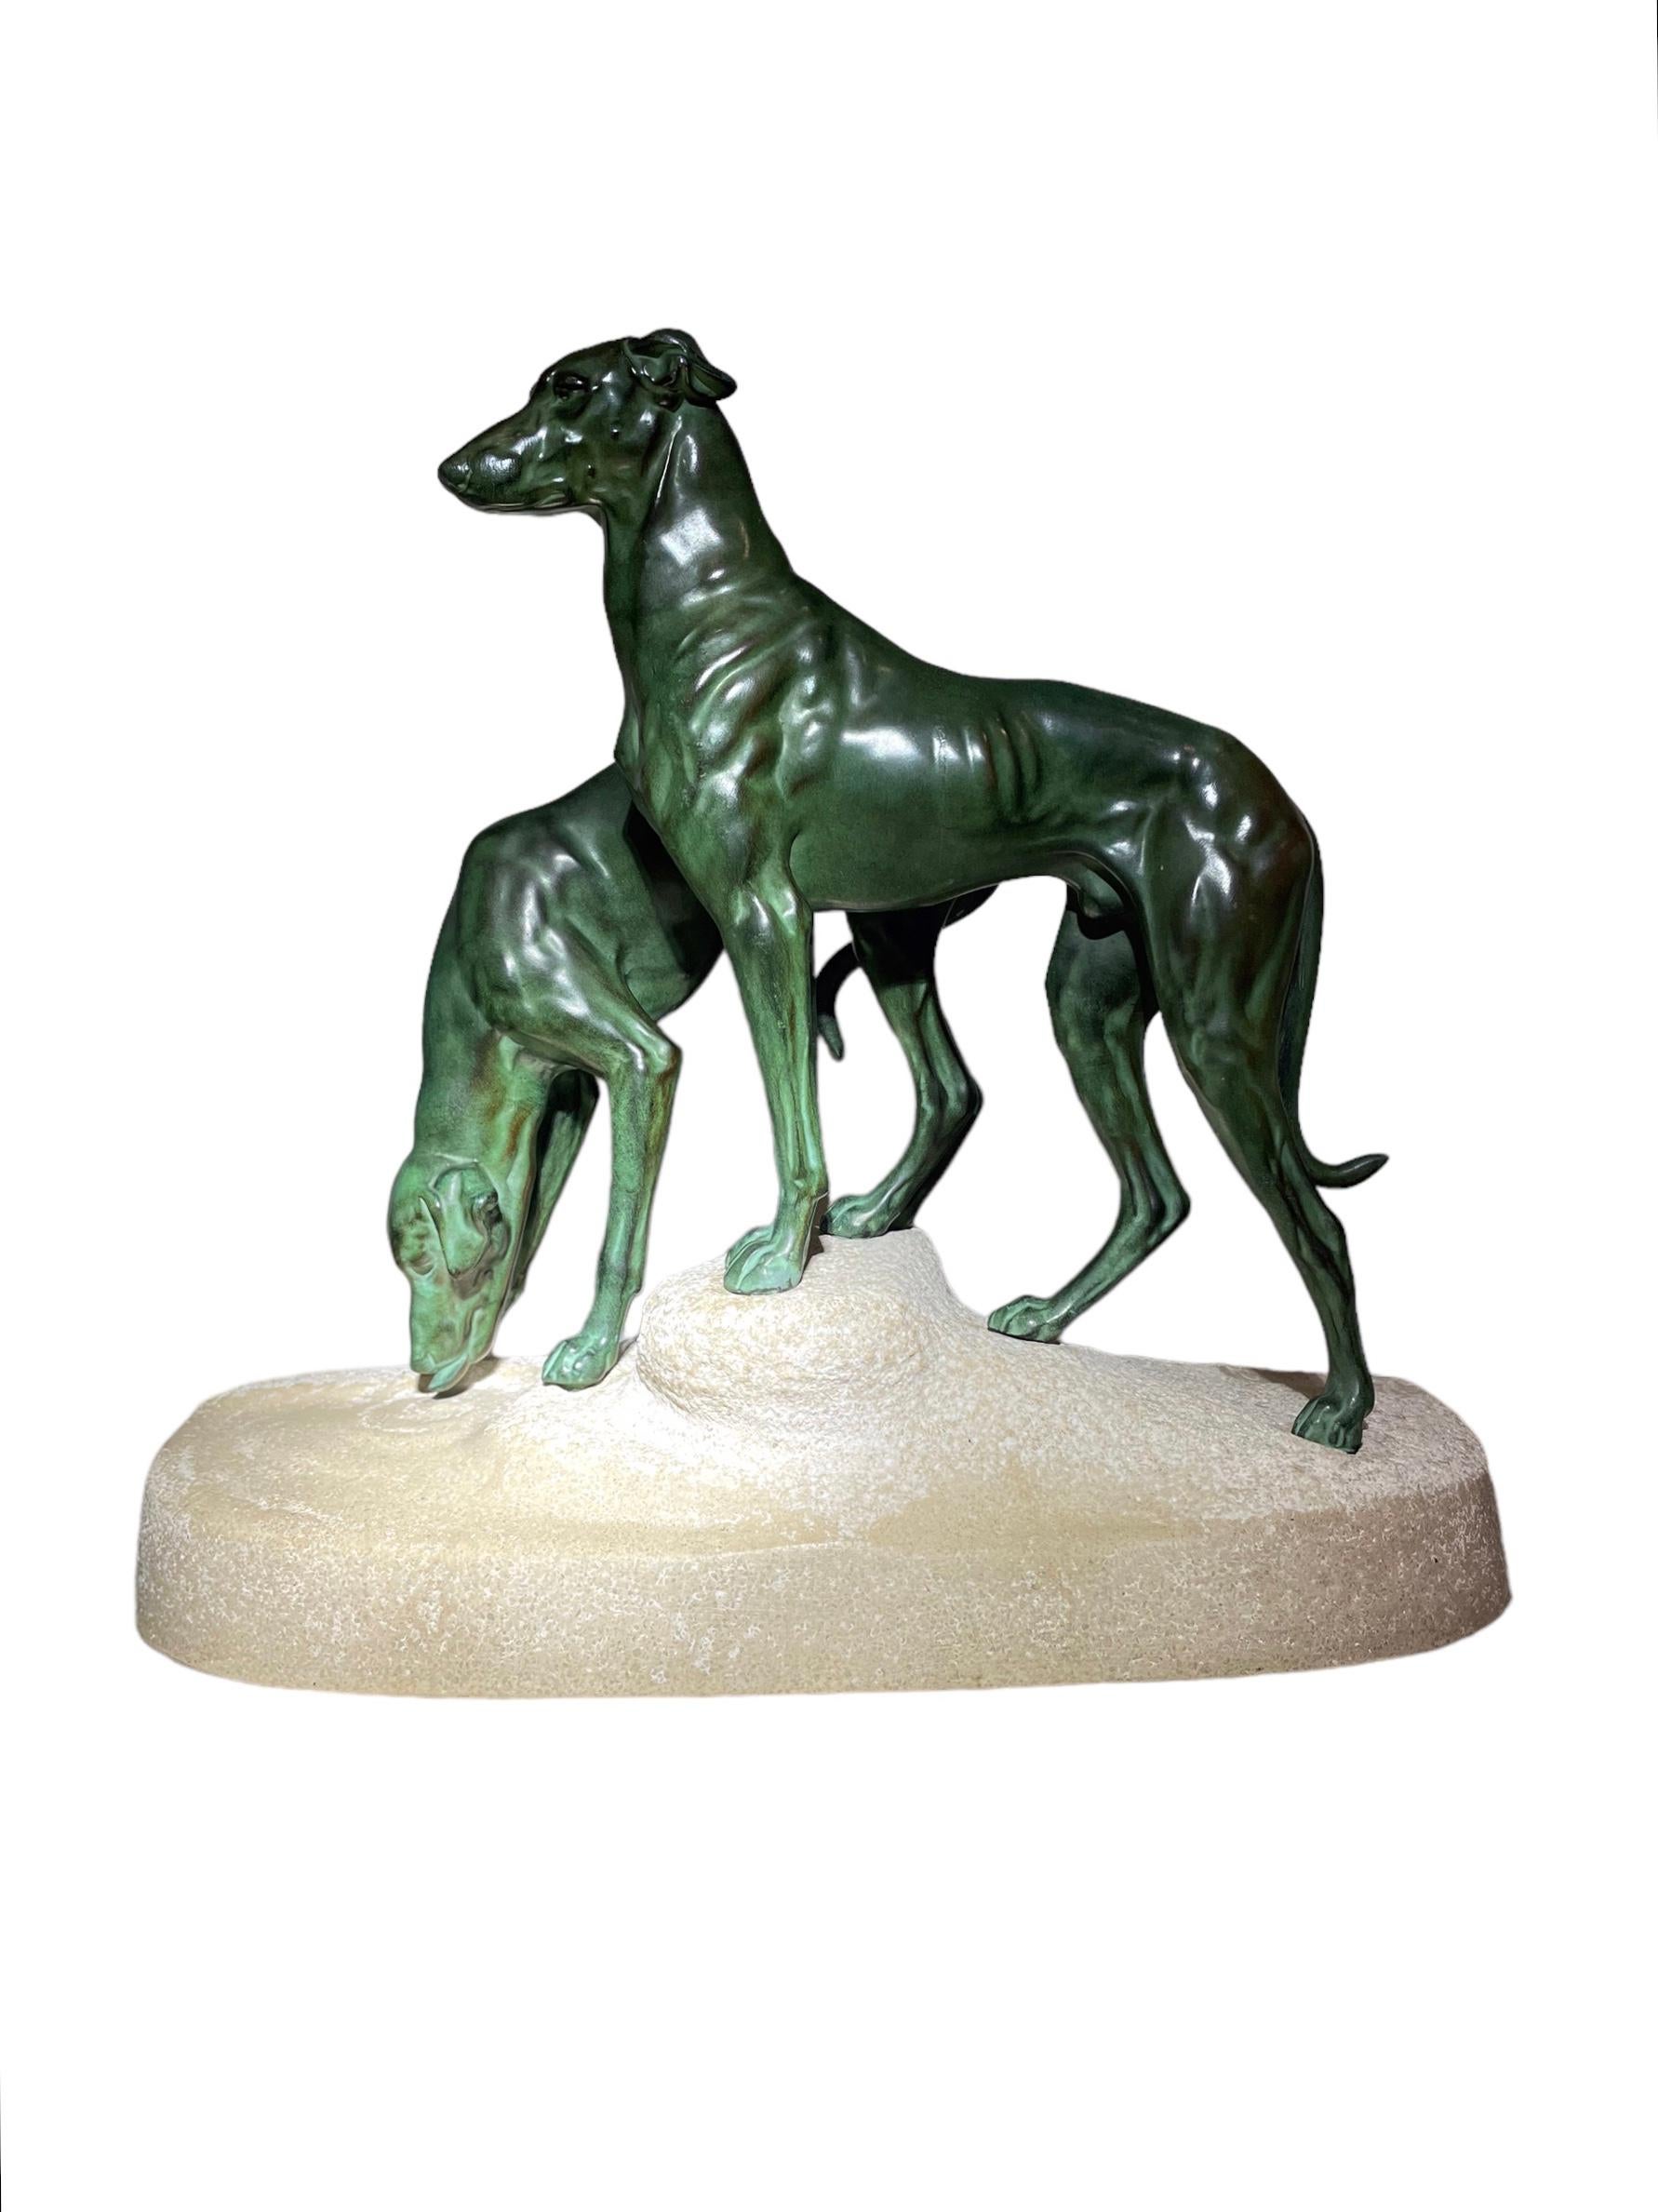 This art deco period sculpture of two art metal hounds, with one hound standing while the other drinks from a pool of water, is set on a naturalistic sandstone base, conceived and created by the esteemed animalier sculptor Jules-Edmond Masson